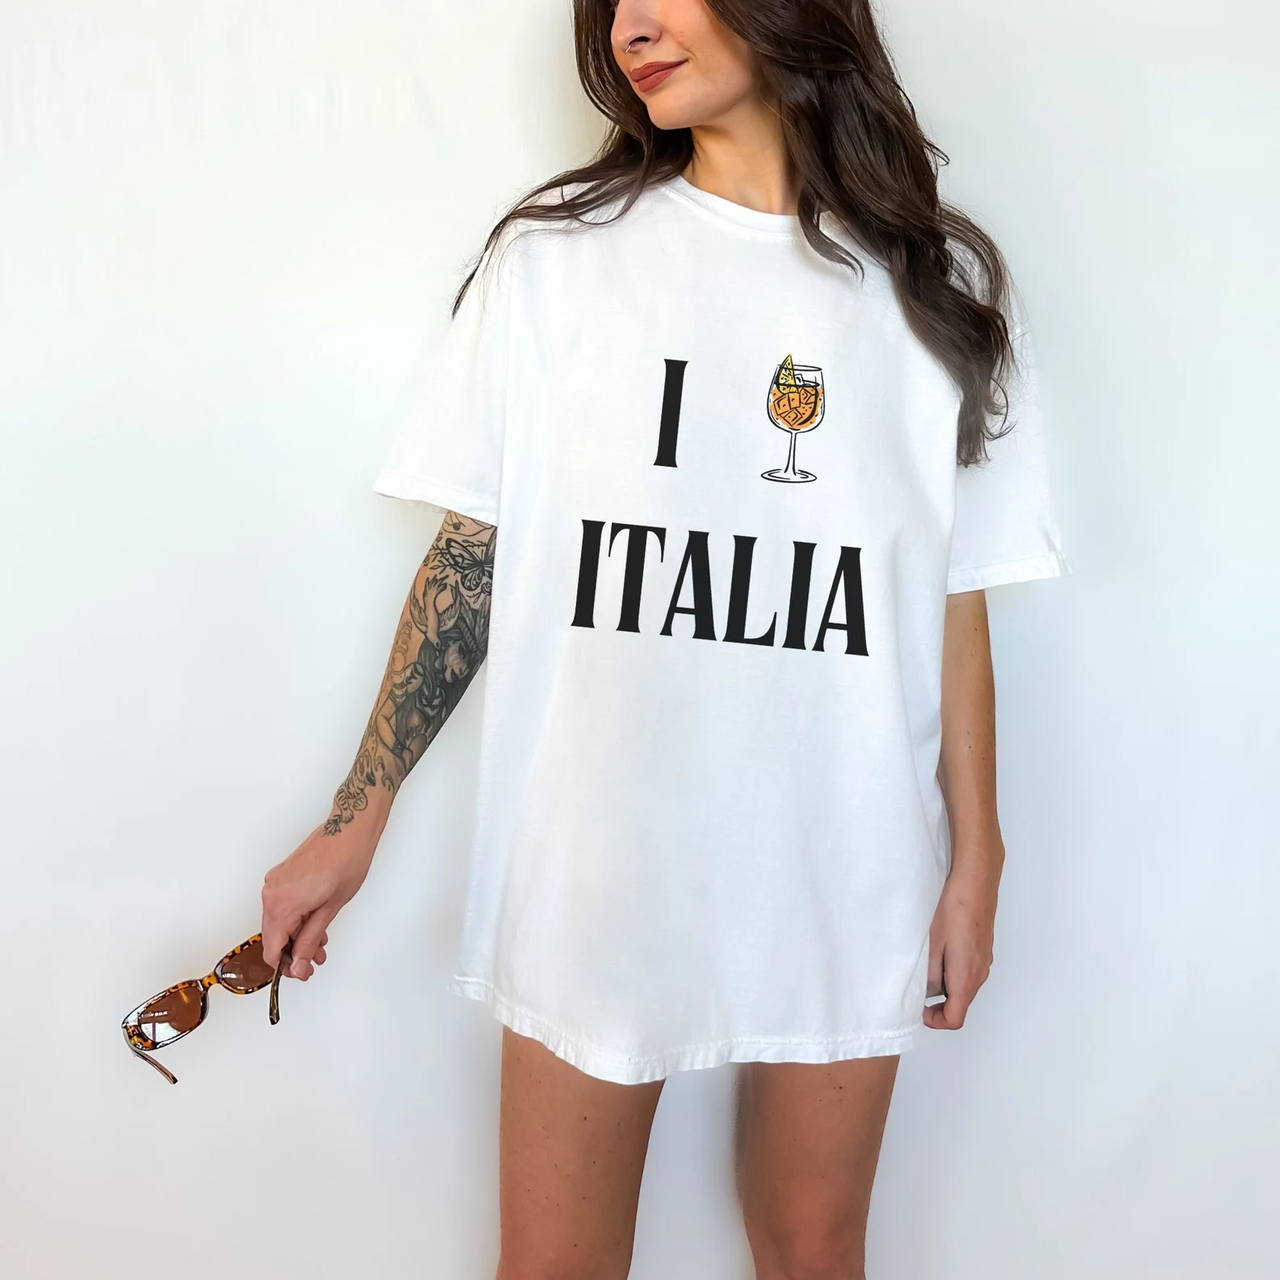 What Are Custom Printed Oversized T Shirts